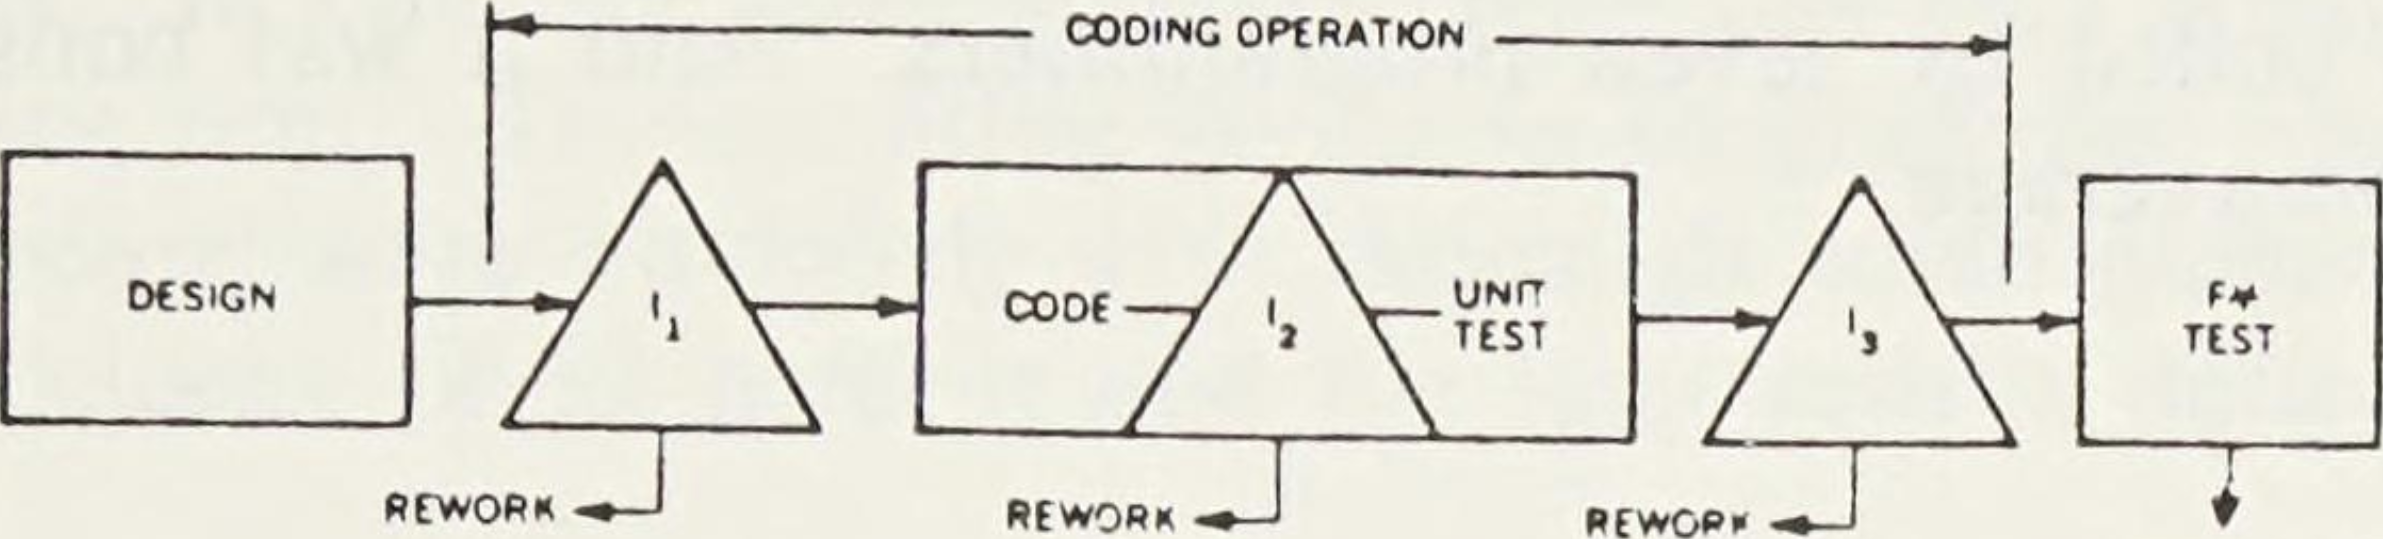 A scheme from Michael Fagan's article on design and code inspections